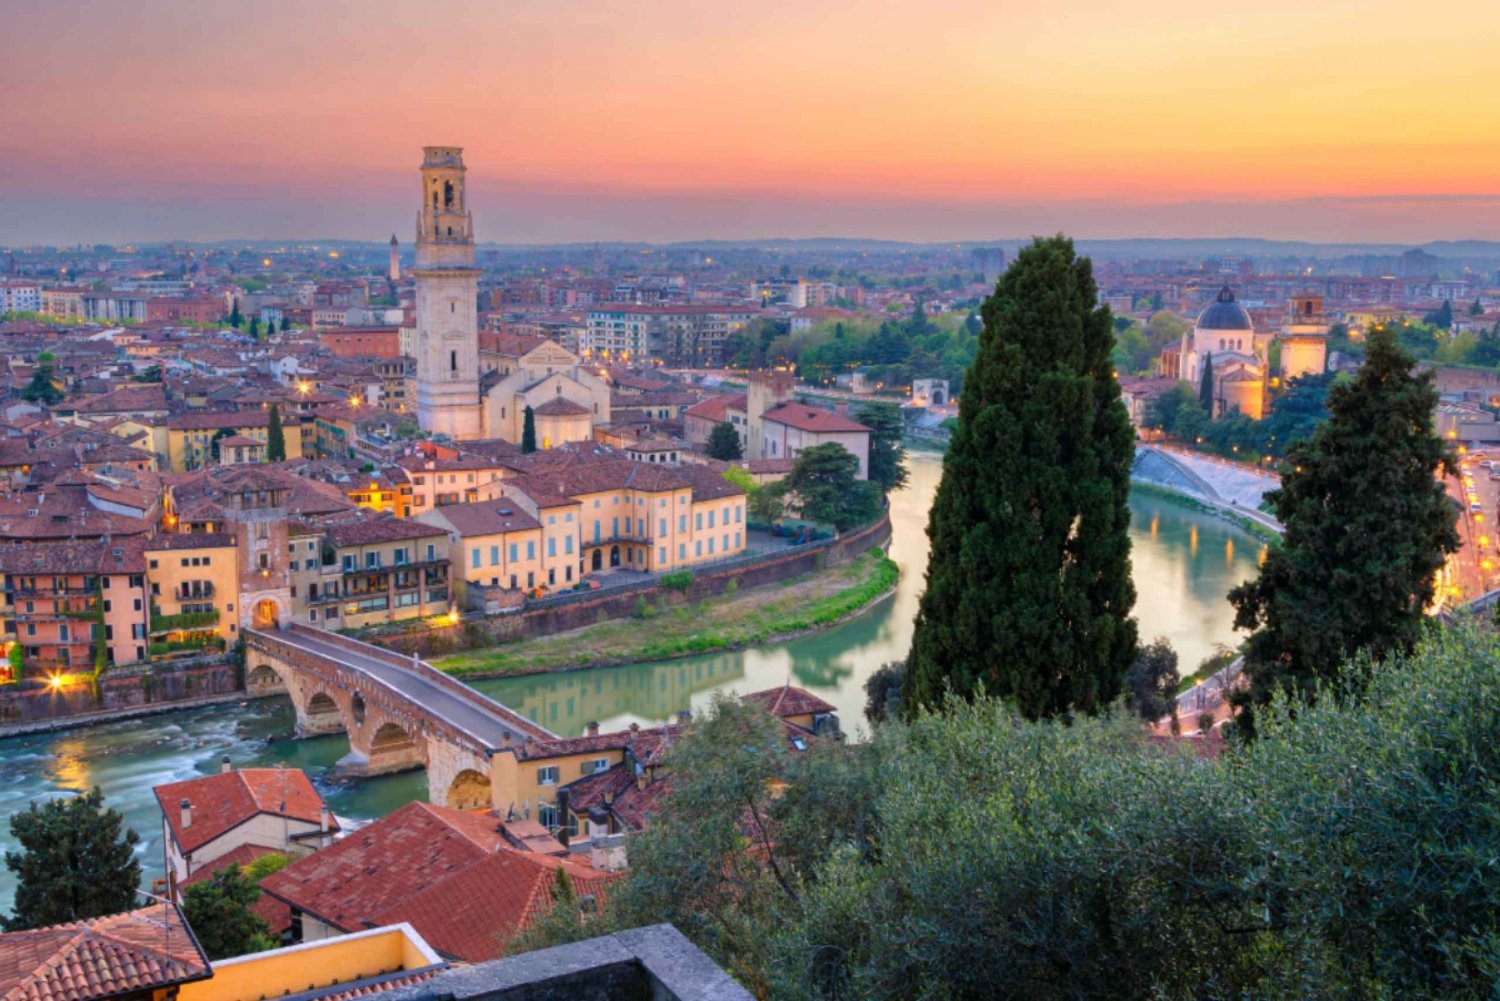 By train from Milan: self-guided tour in Verona